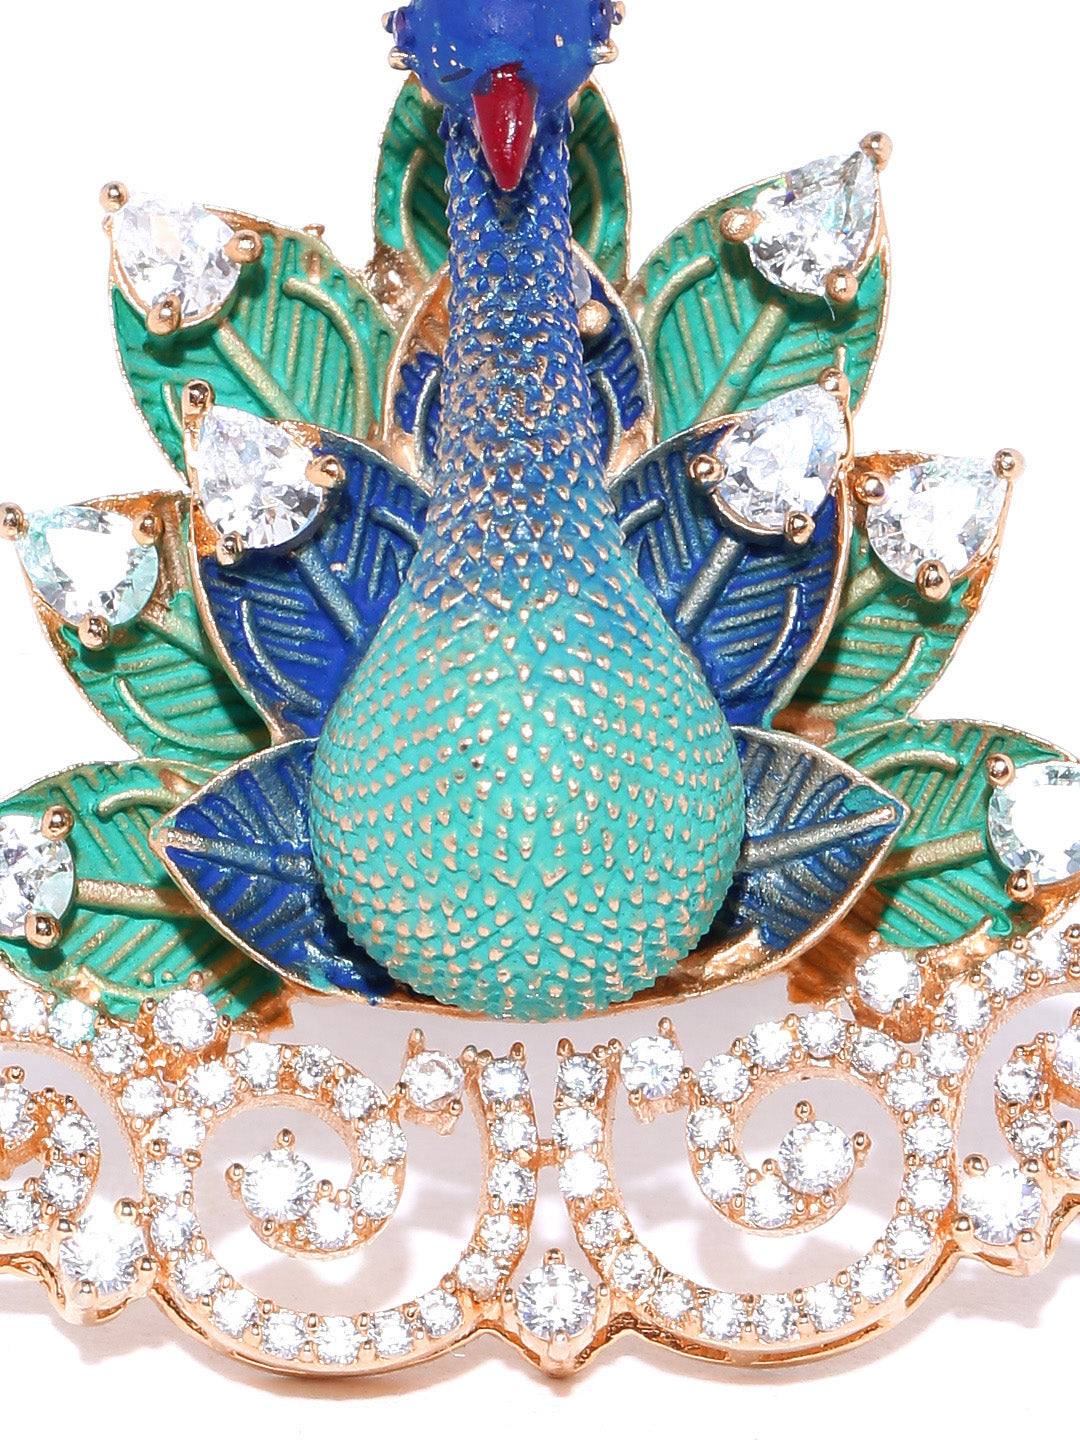 Gold-Plated American Diamond Studded Peacock Inspired Meenakari Adjustable Ring in Peach and Green Color